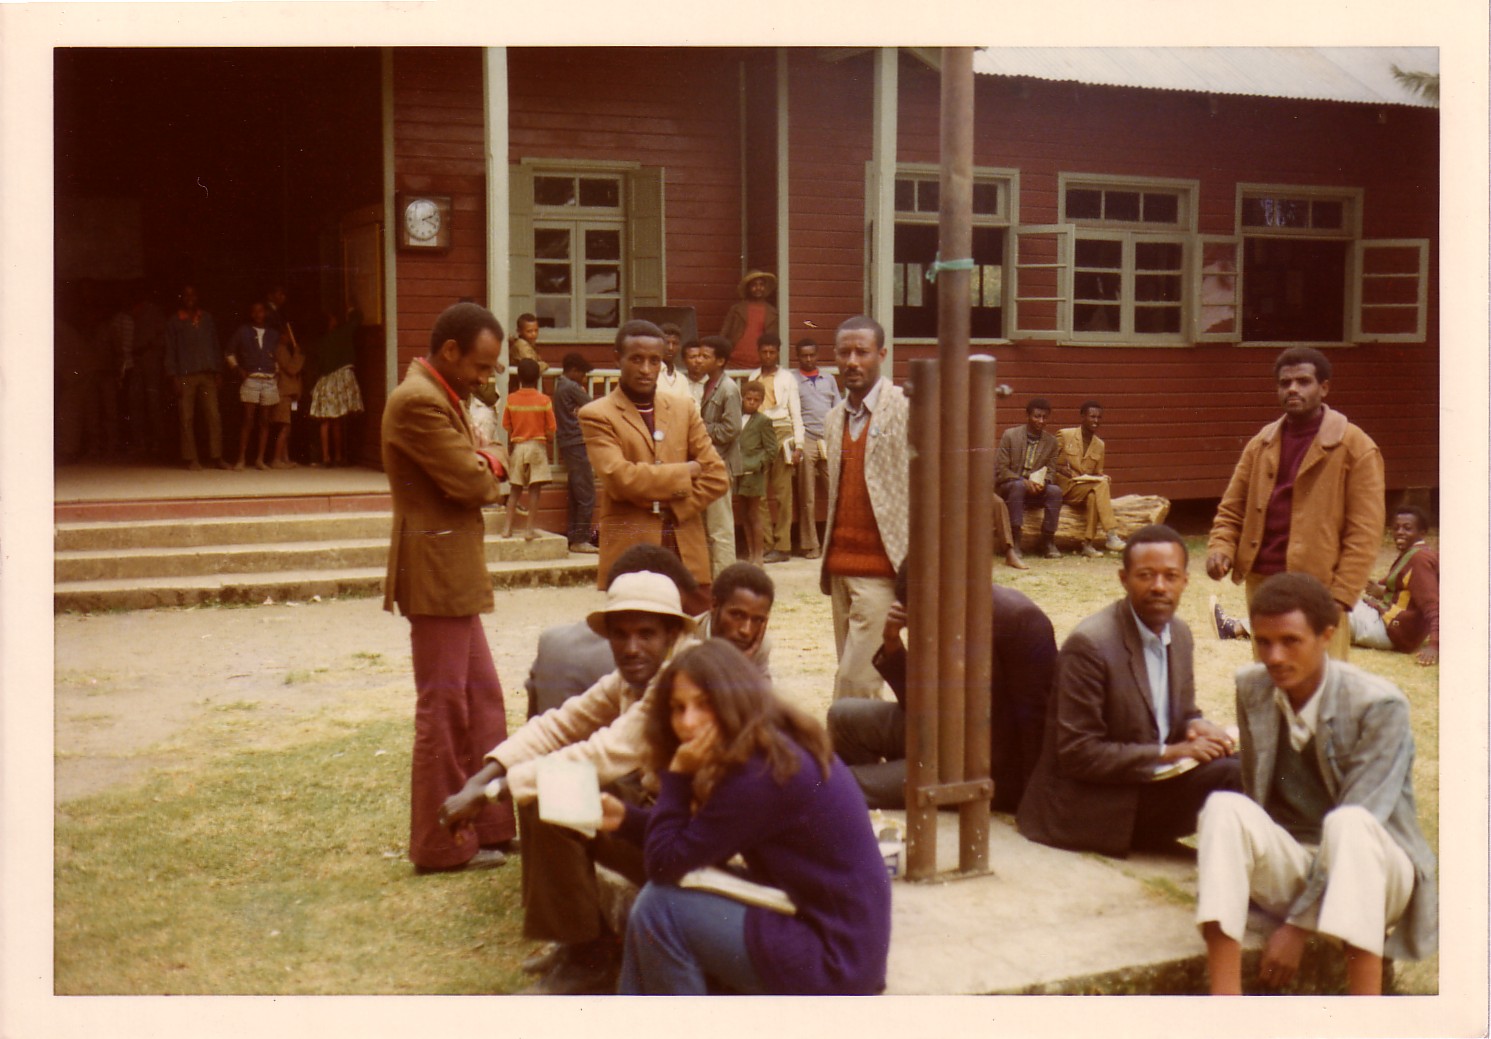 Andi Ostrowe sits outside a building, surrounded by several men.